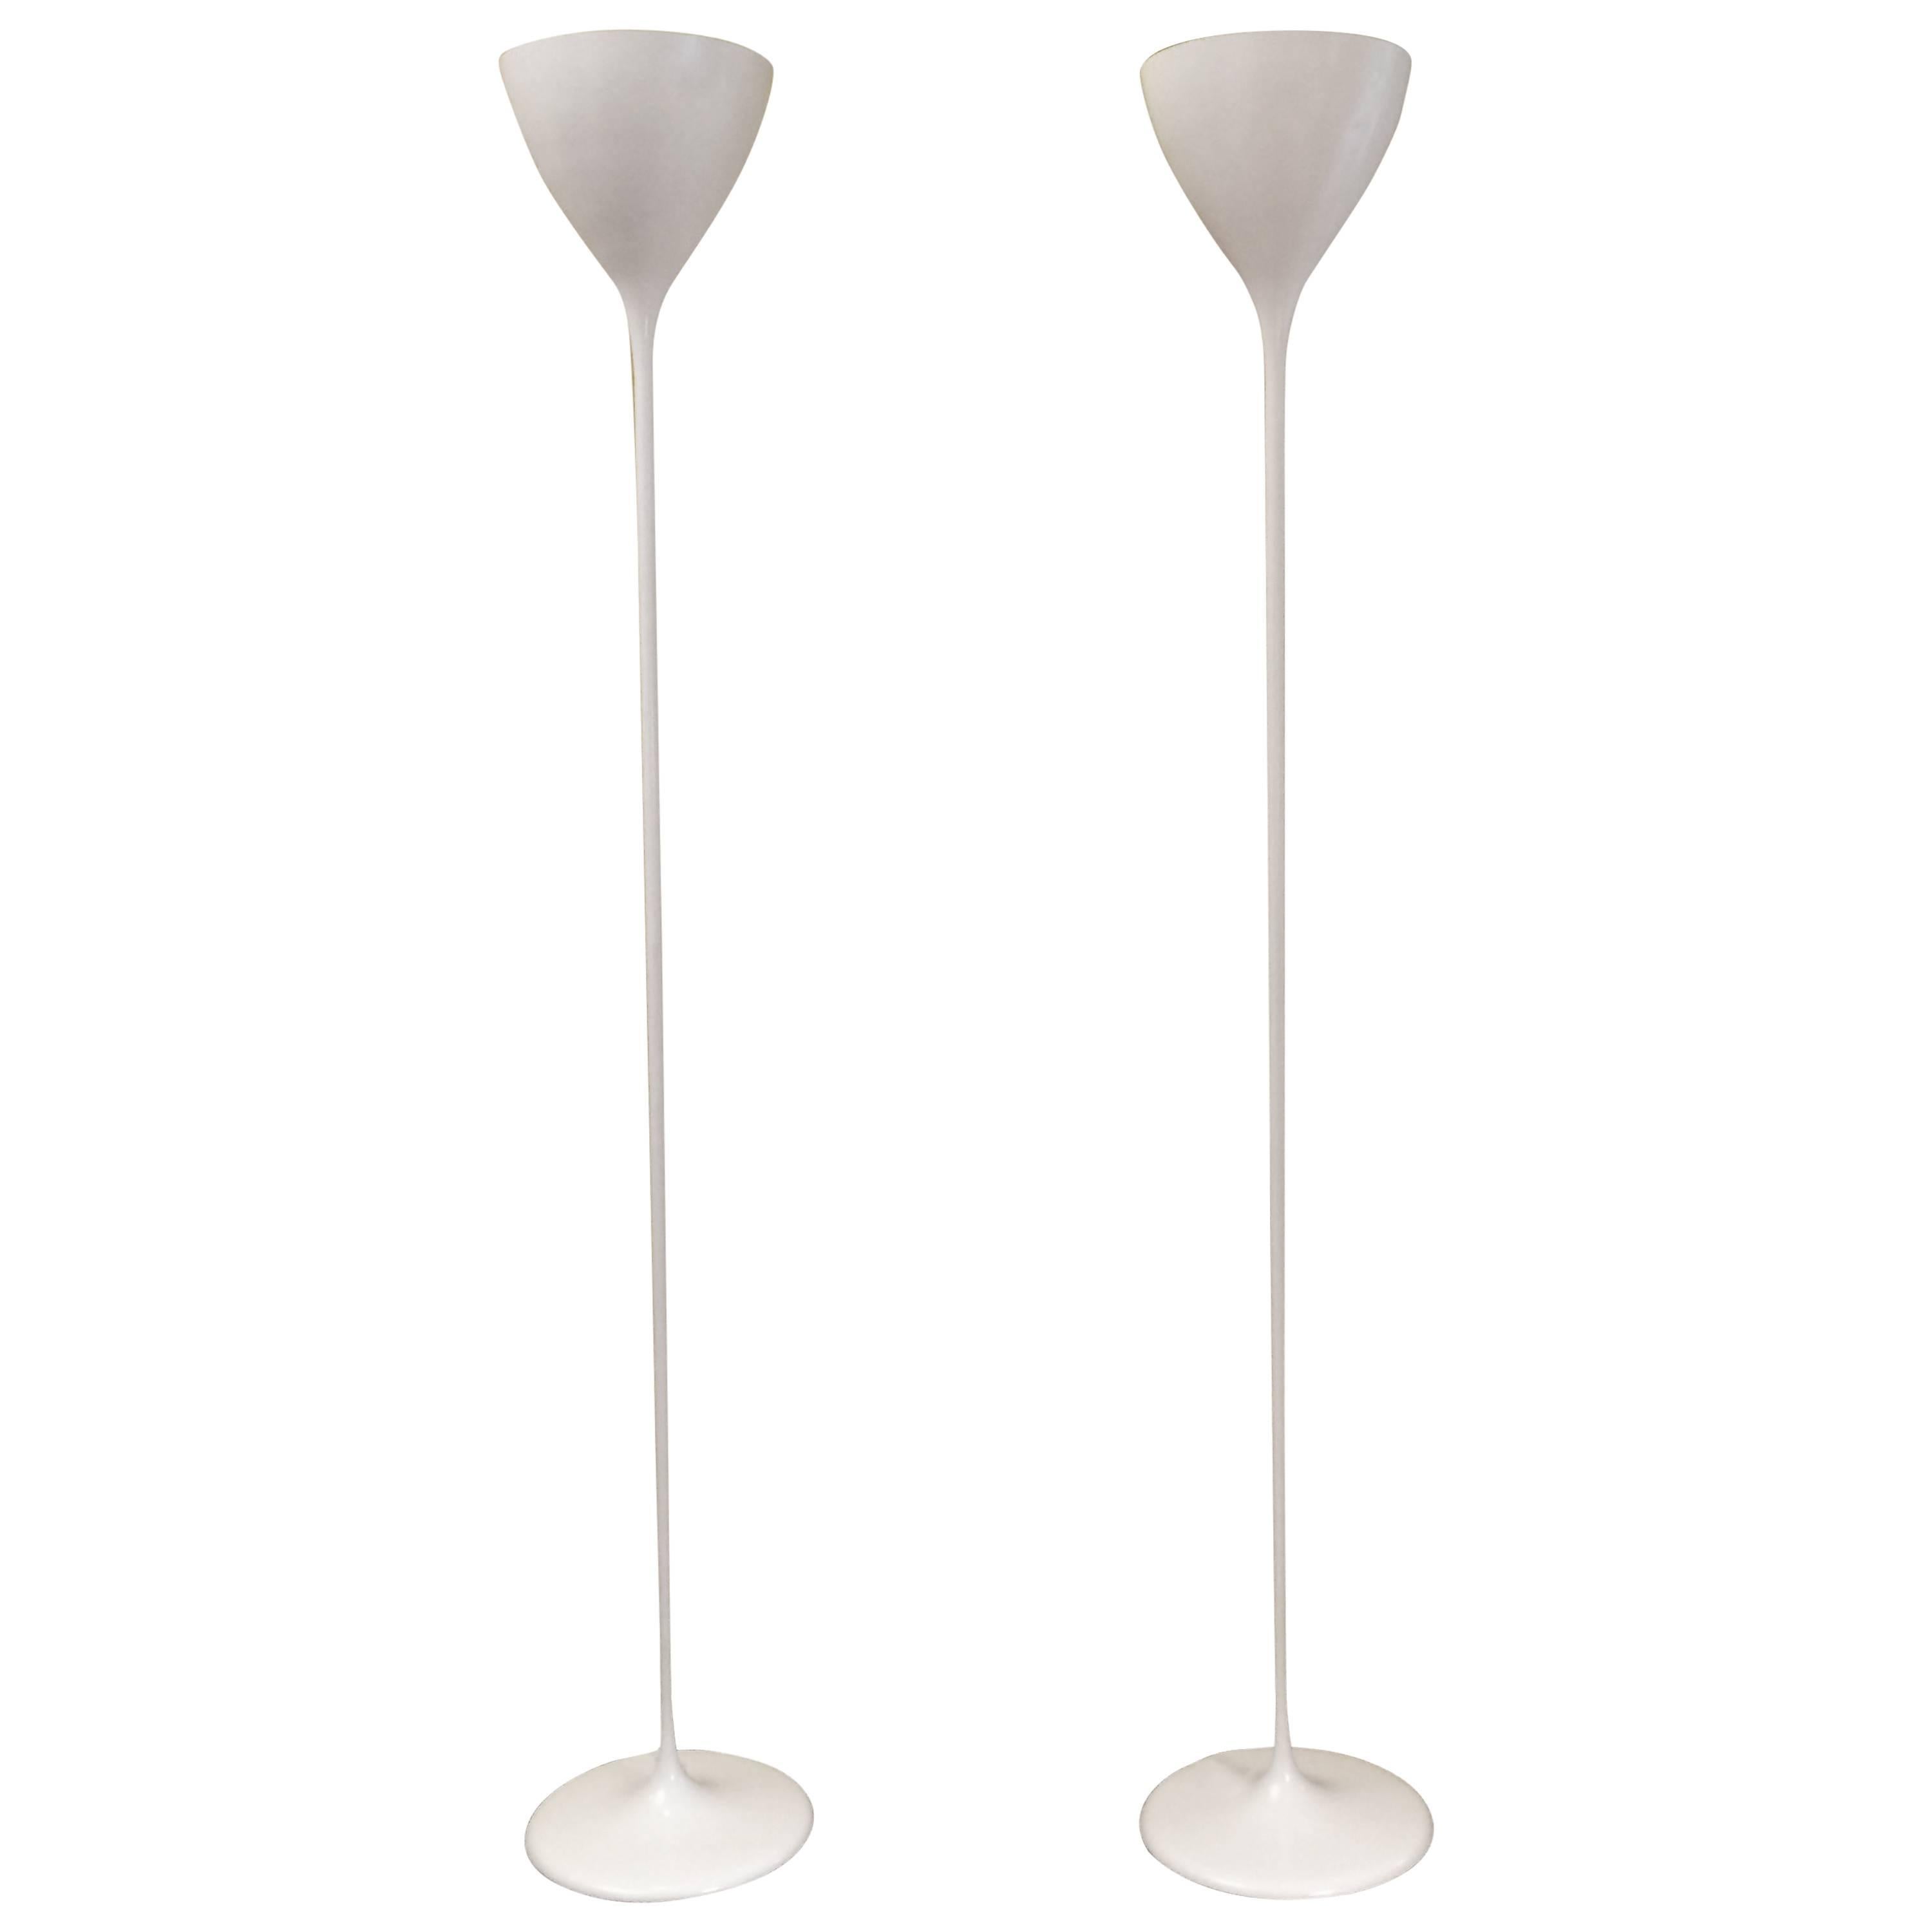 Two White Max Bill Torchiere Lamps Floor Lamps B.A.G. Turgi, Switzerland